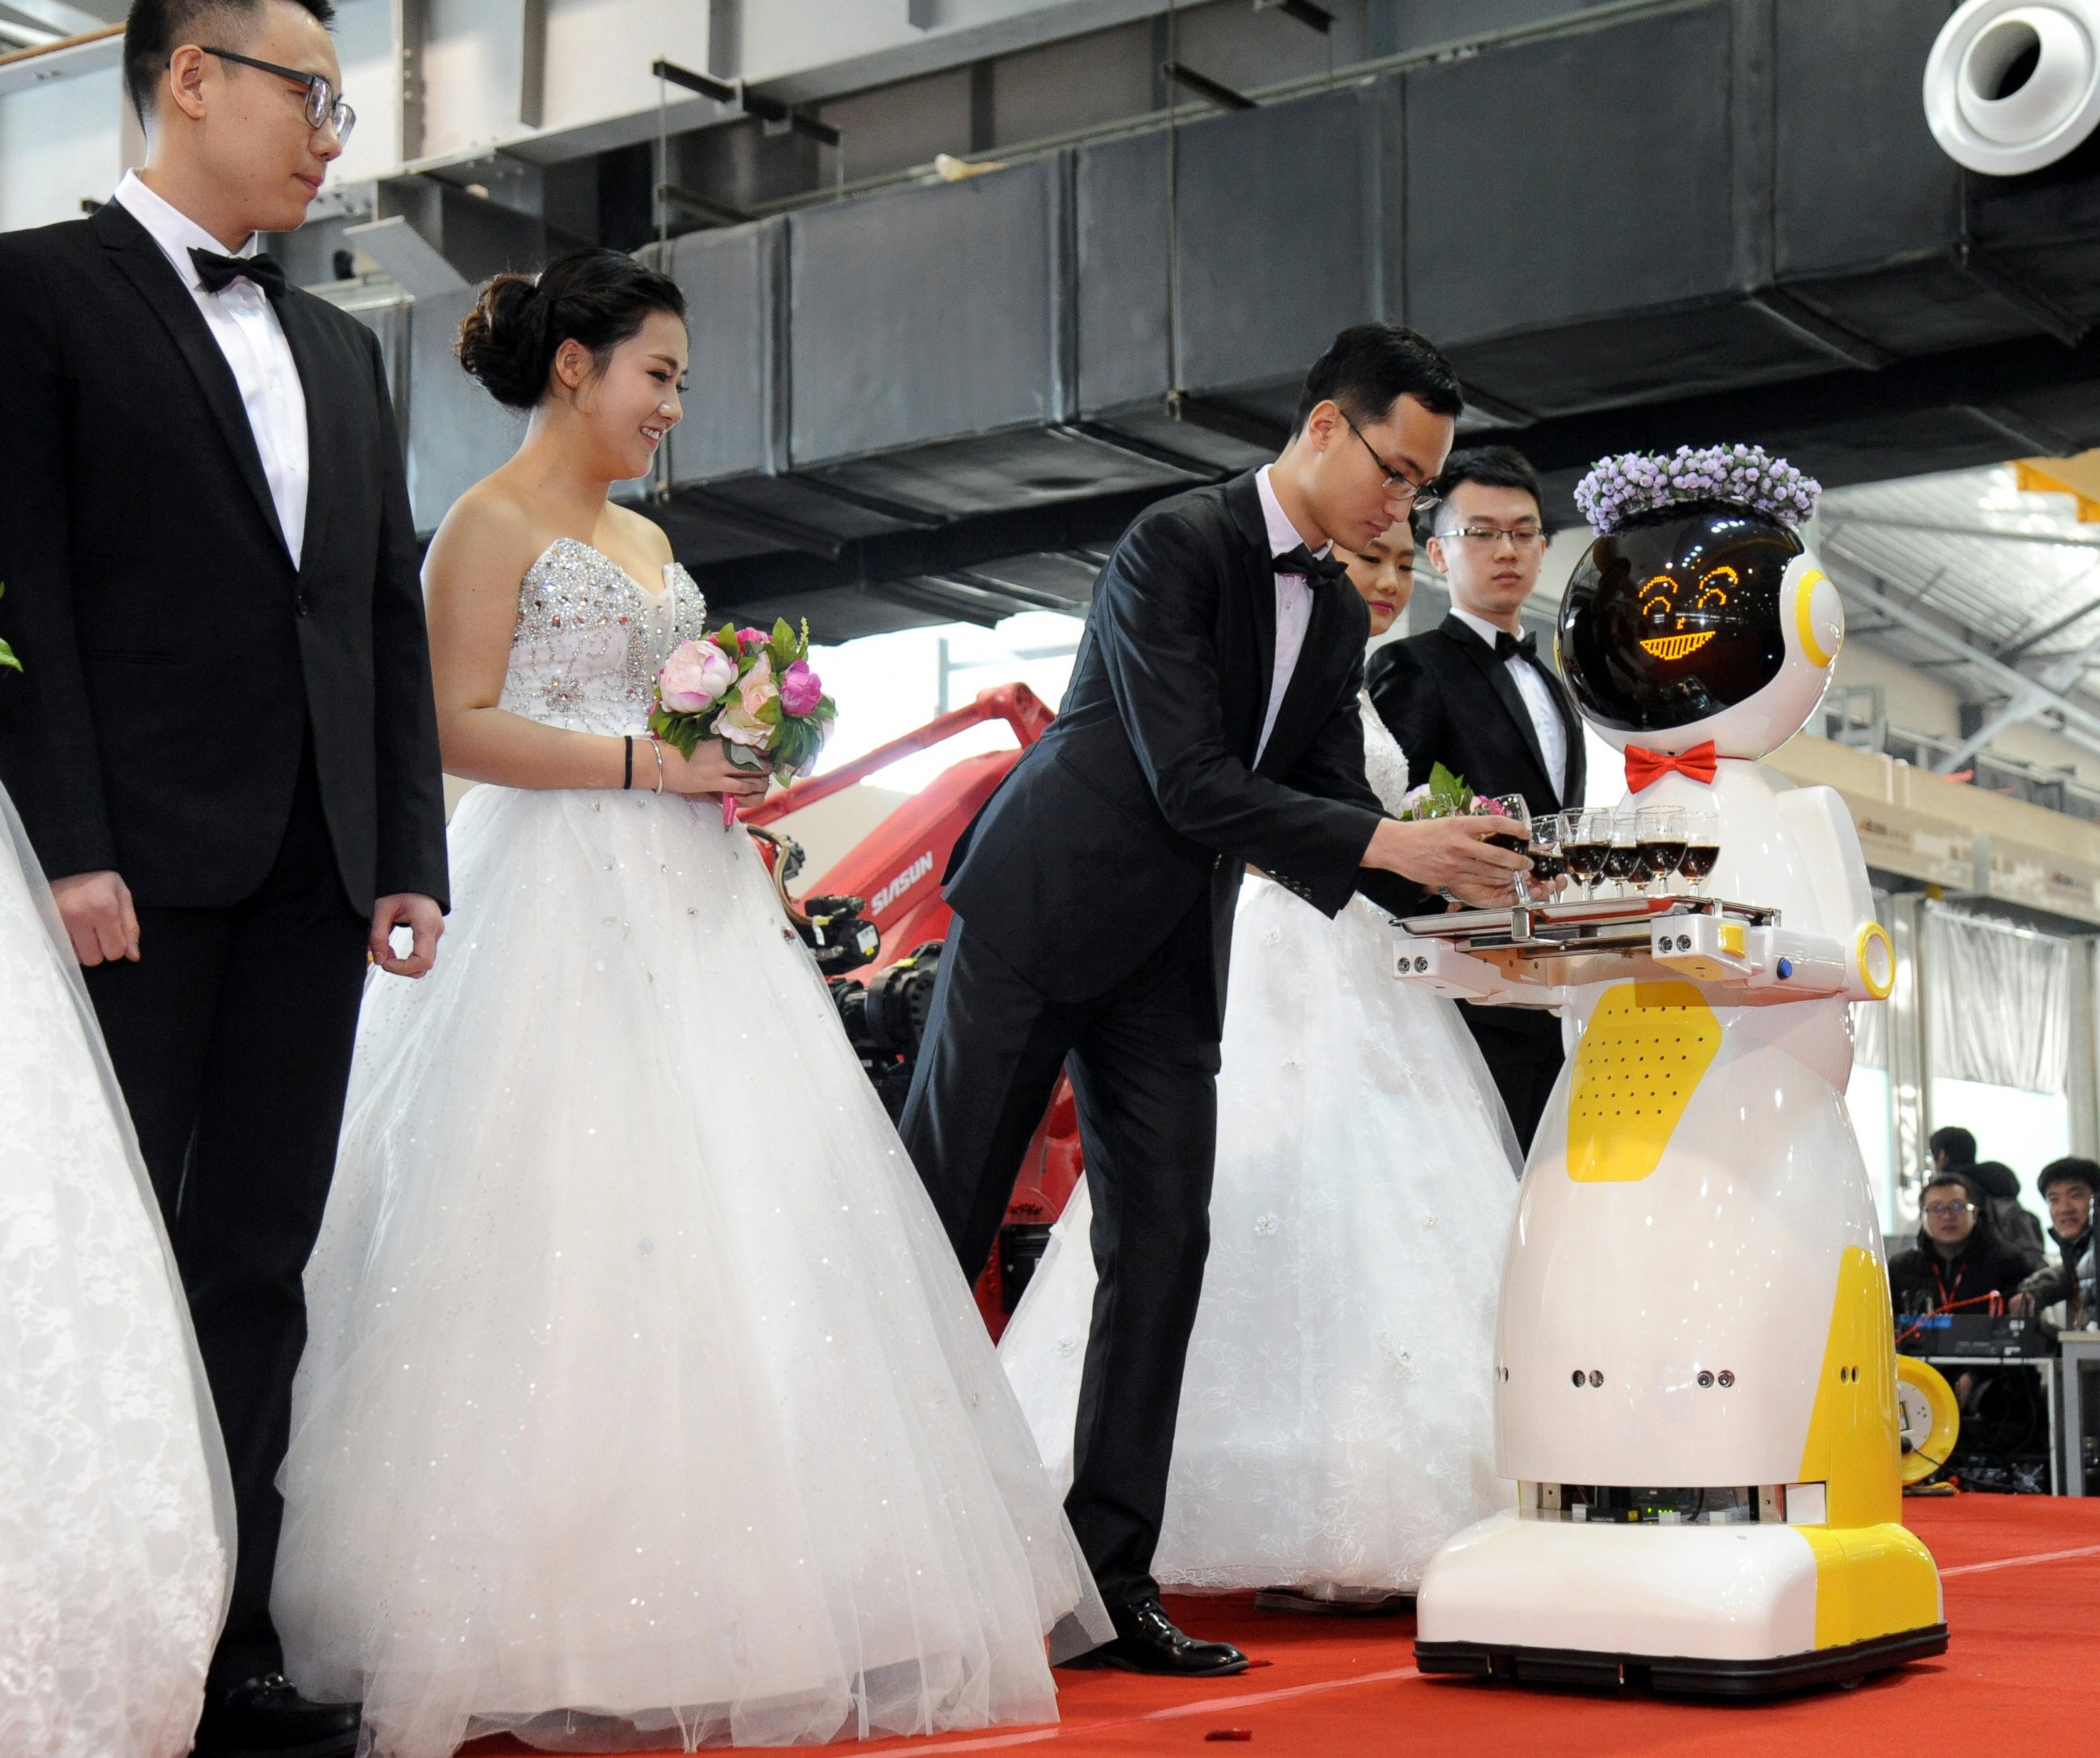 PHOTO: A service robot hands out glasses of red wine for brides and grooms during a group wedding ceremony at a robots factory, Jan. 20, 2016, in Shenyang, China.